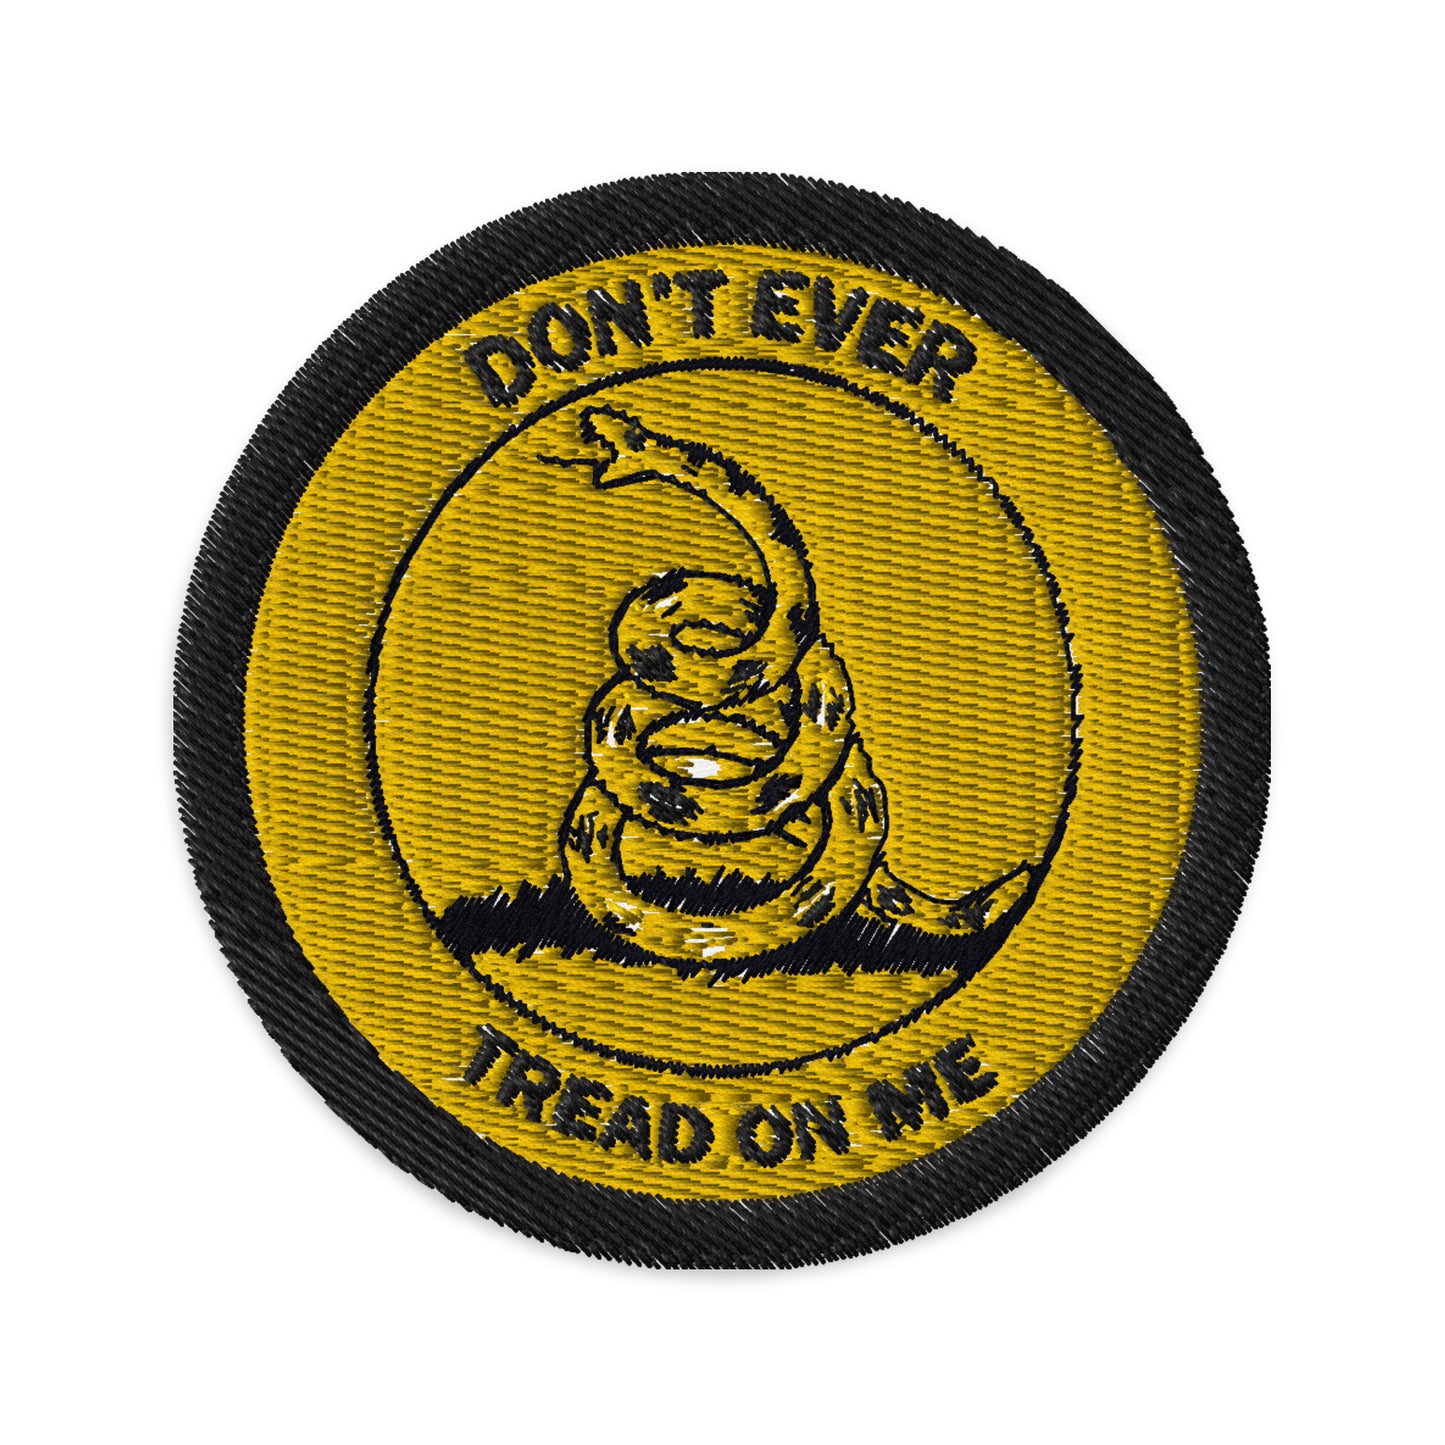 Don't Tread - Embroidered patches